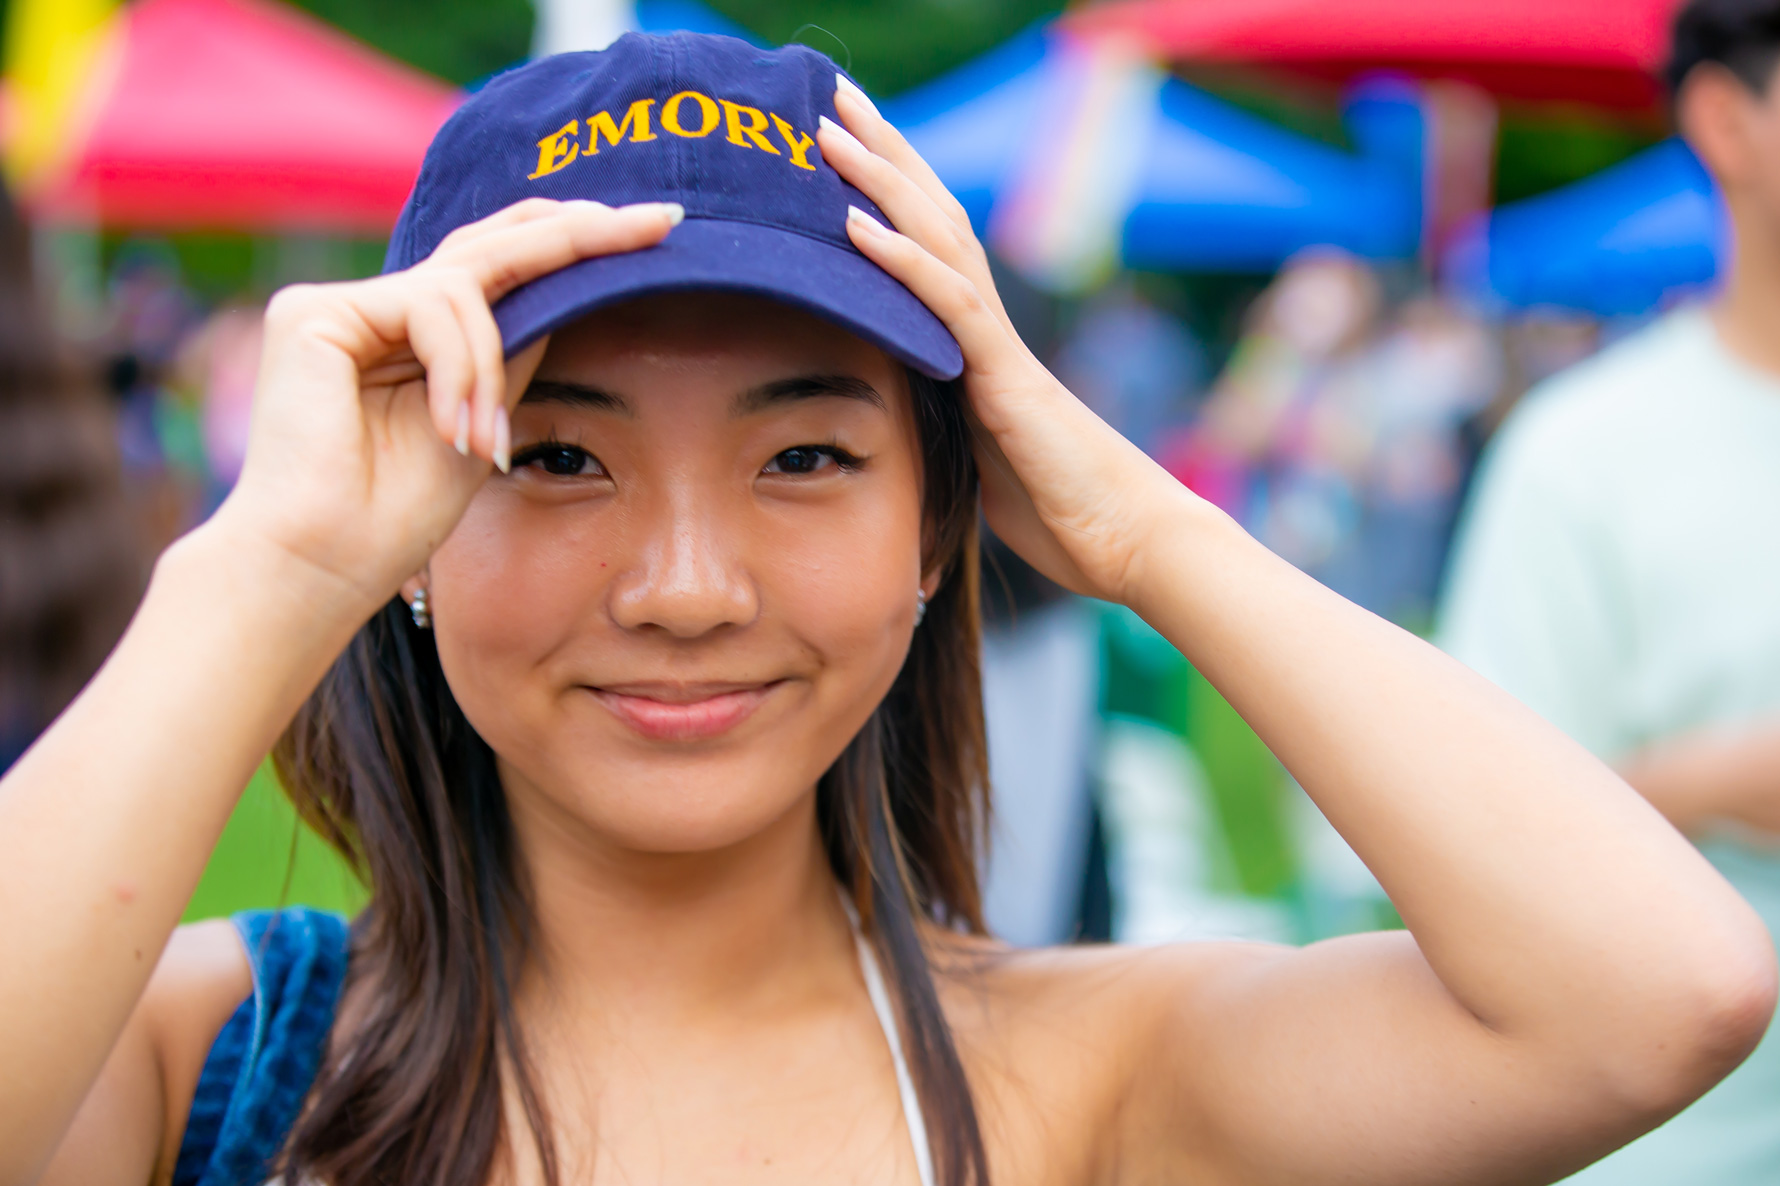 Student posing with Emory hat